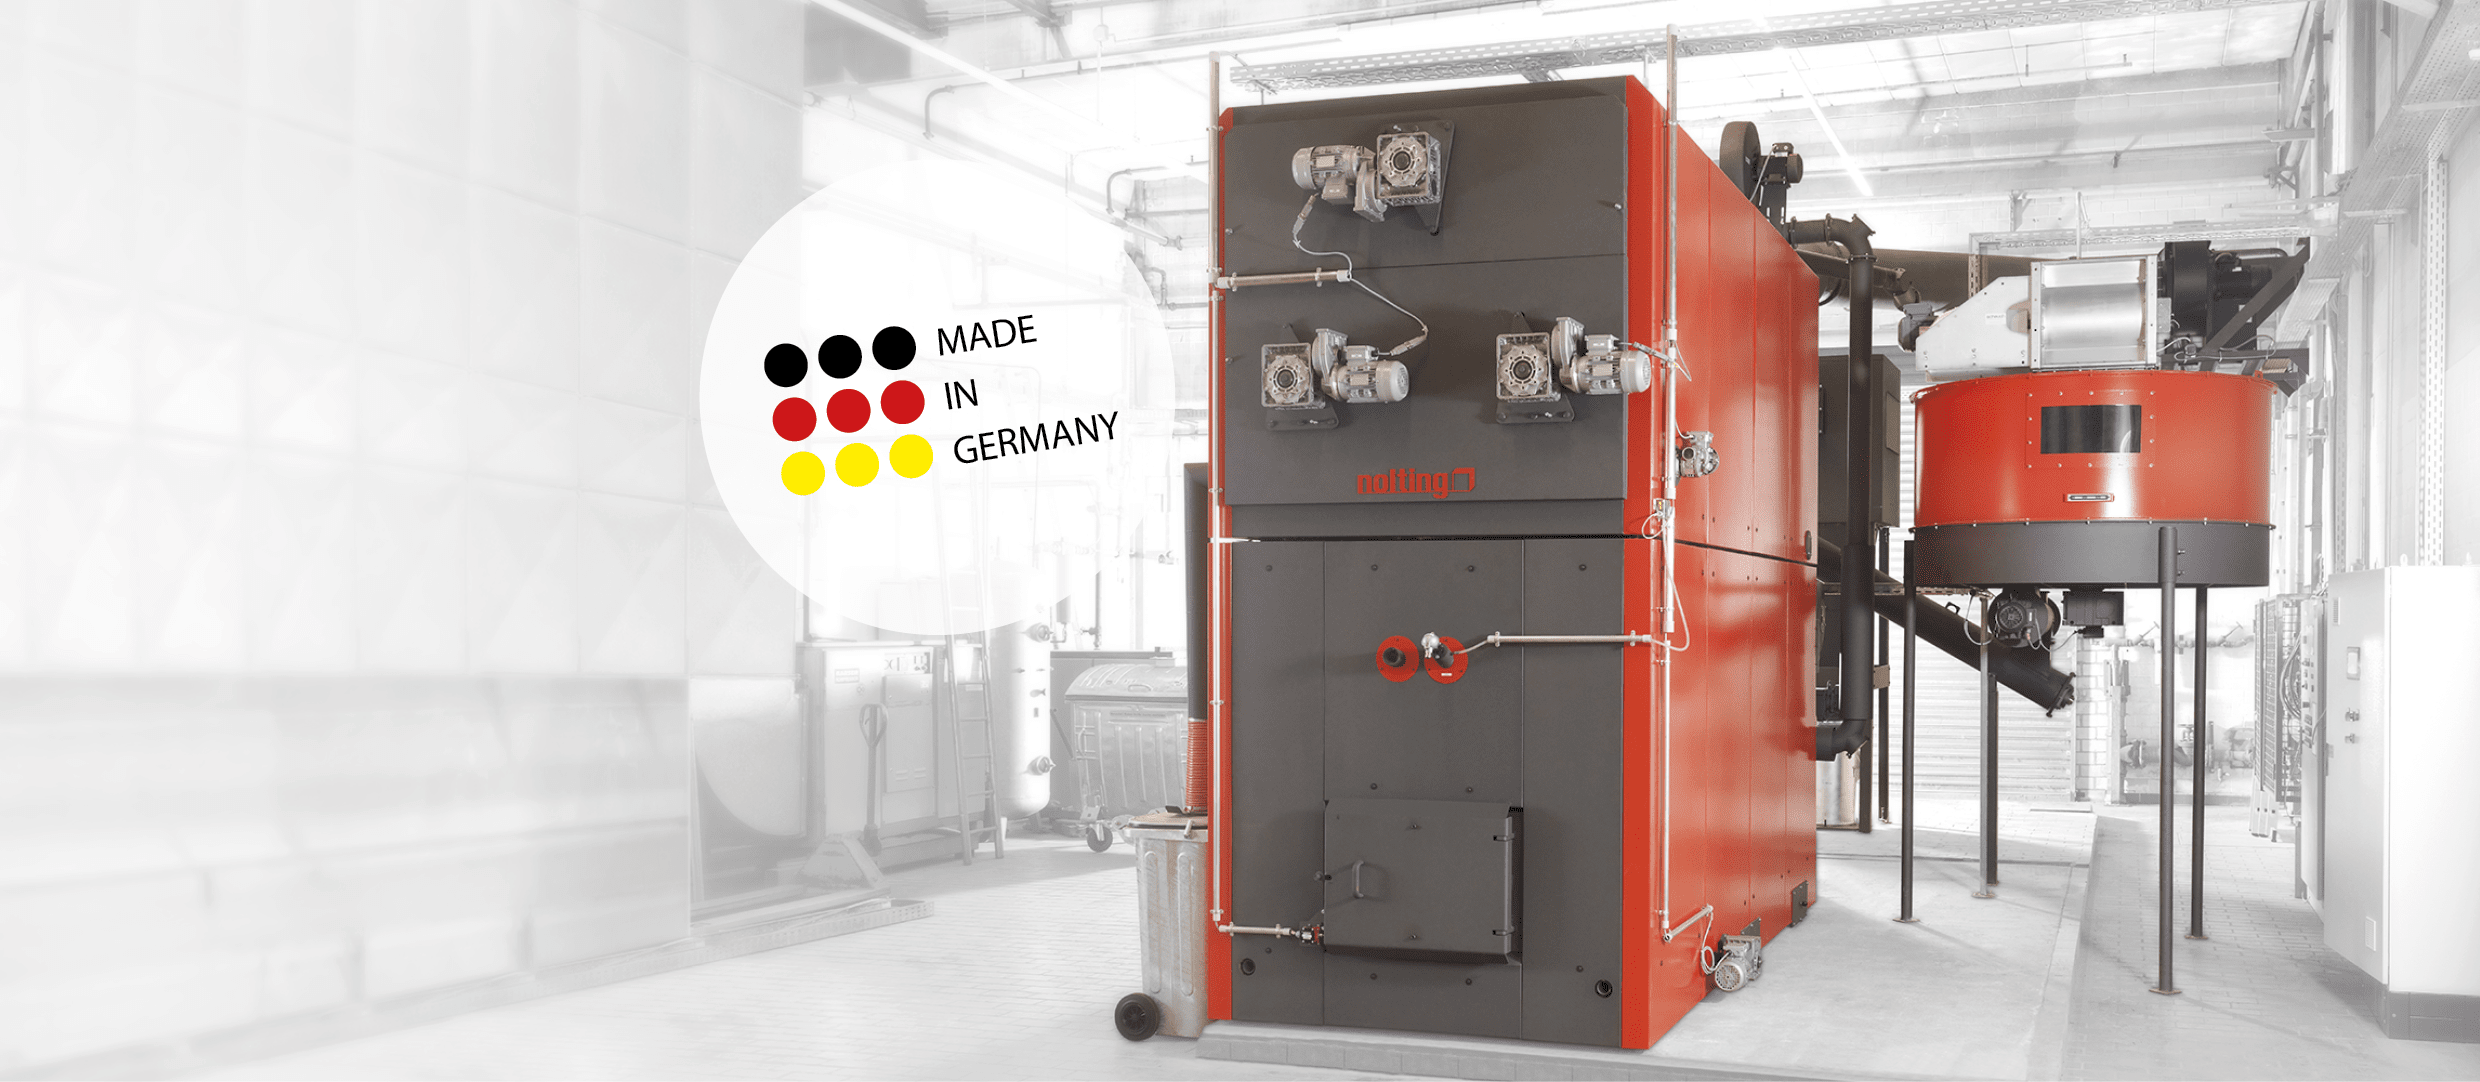 Nolting wood firing technology innovative for over 75 years